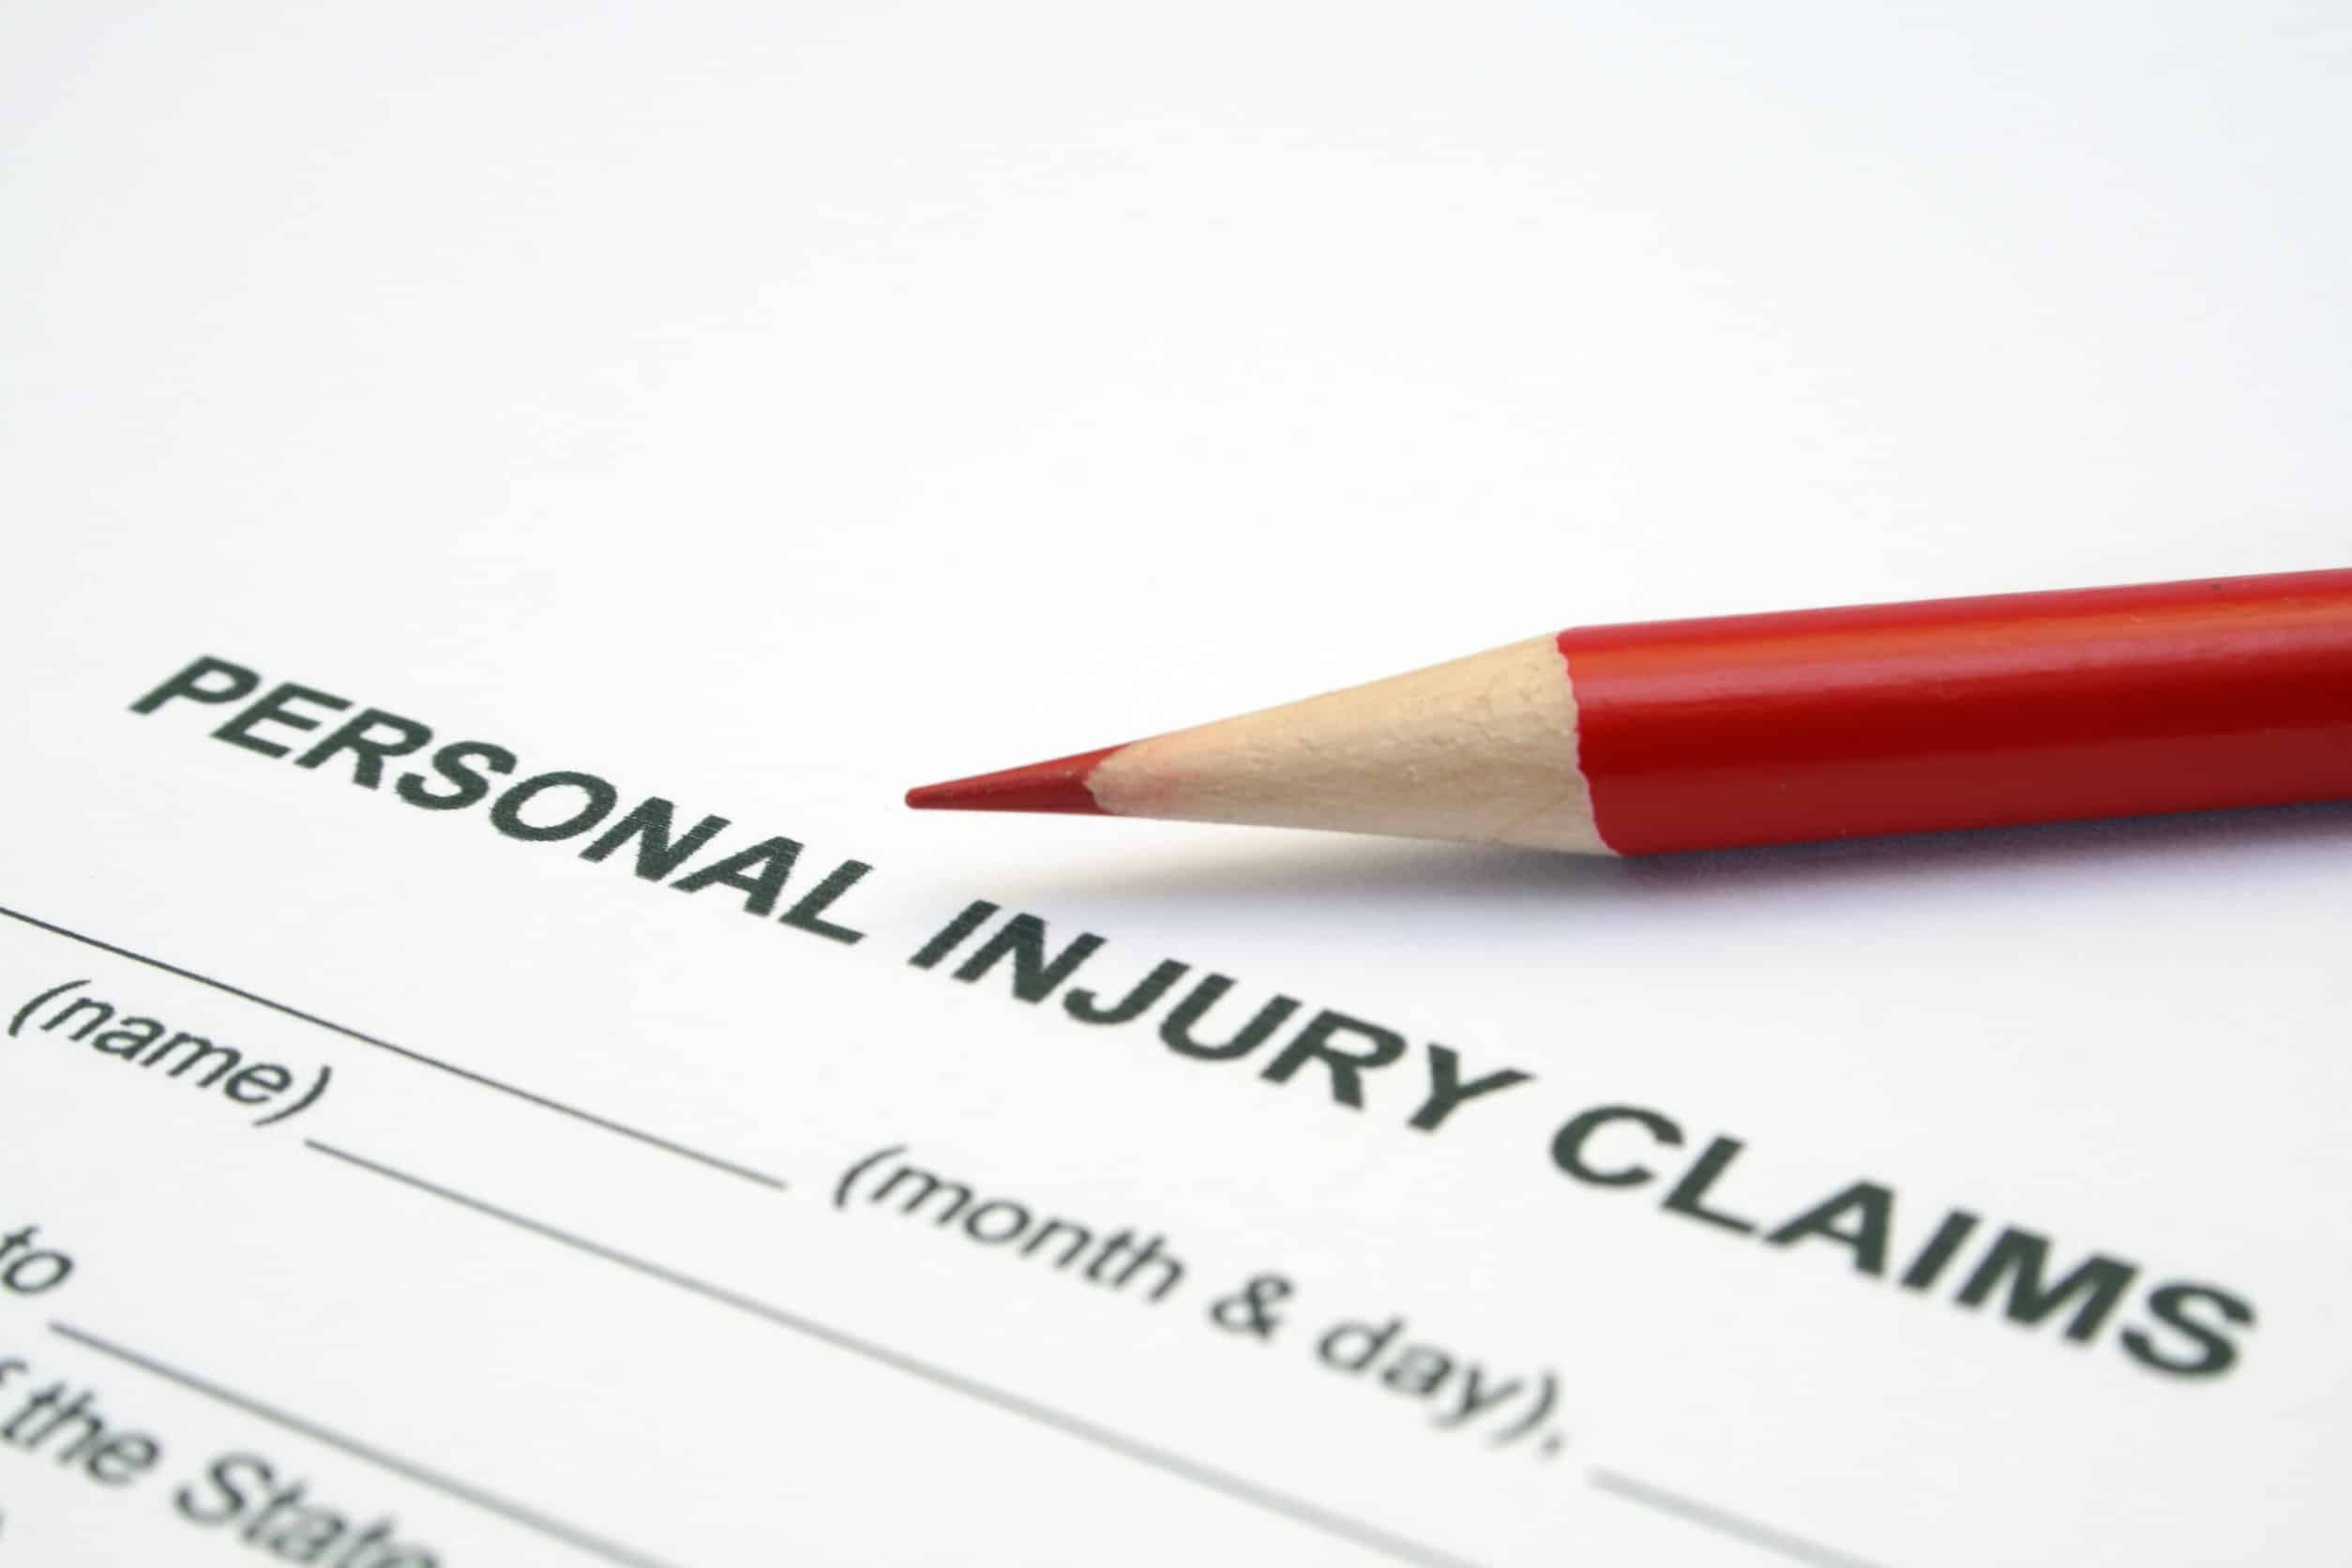 South Florida Personal Injury Attorney